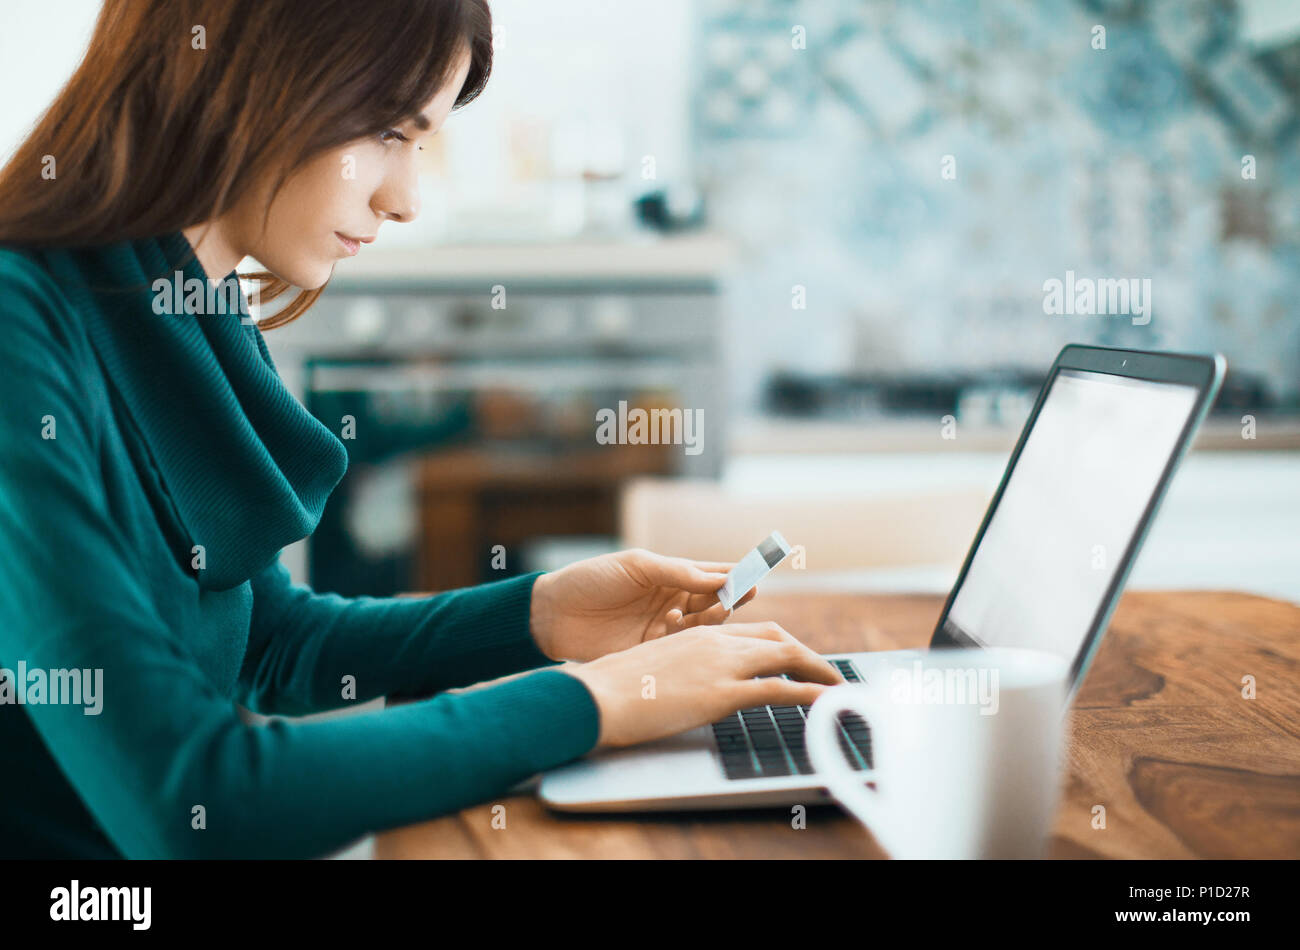 Woman work with pc and credit card, business Stock Photo